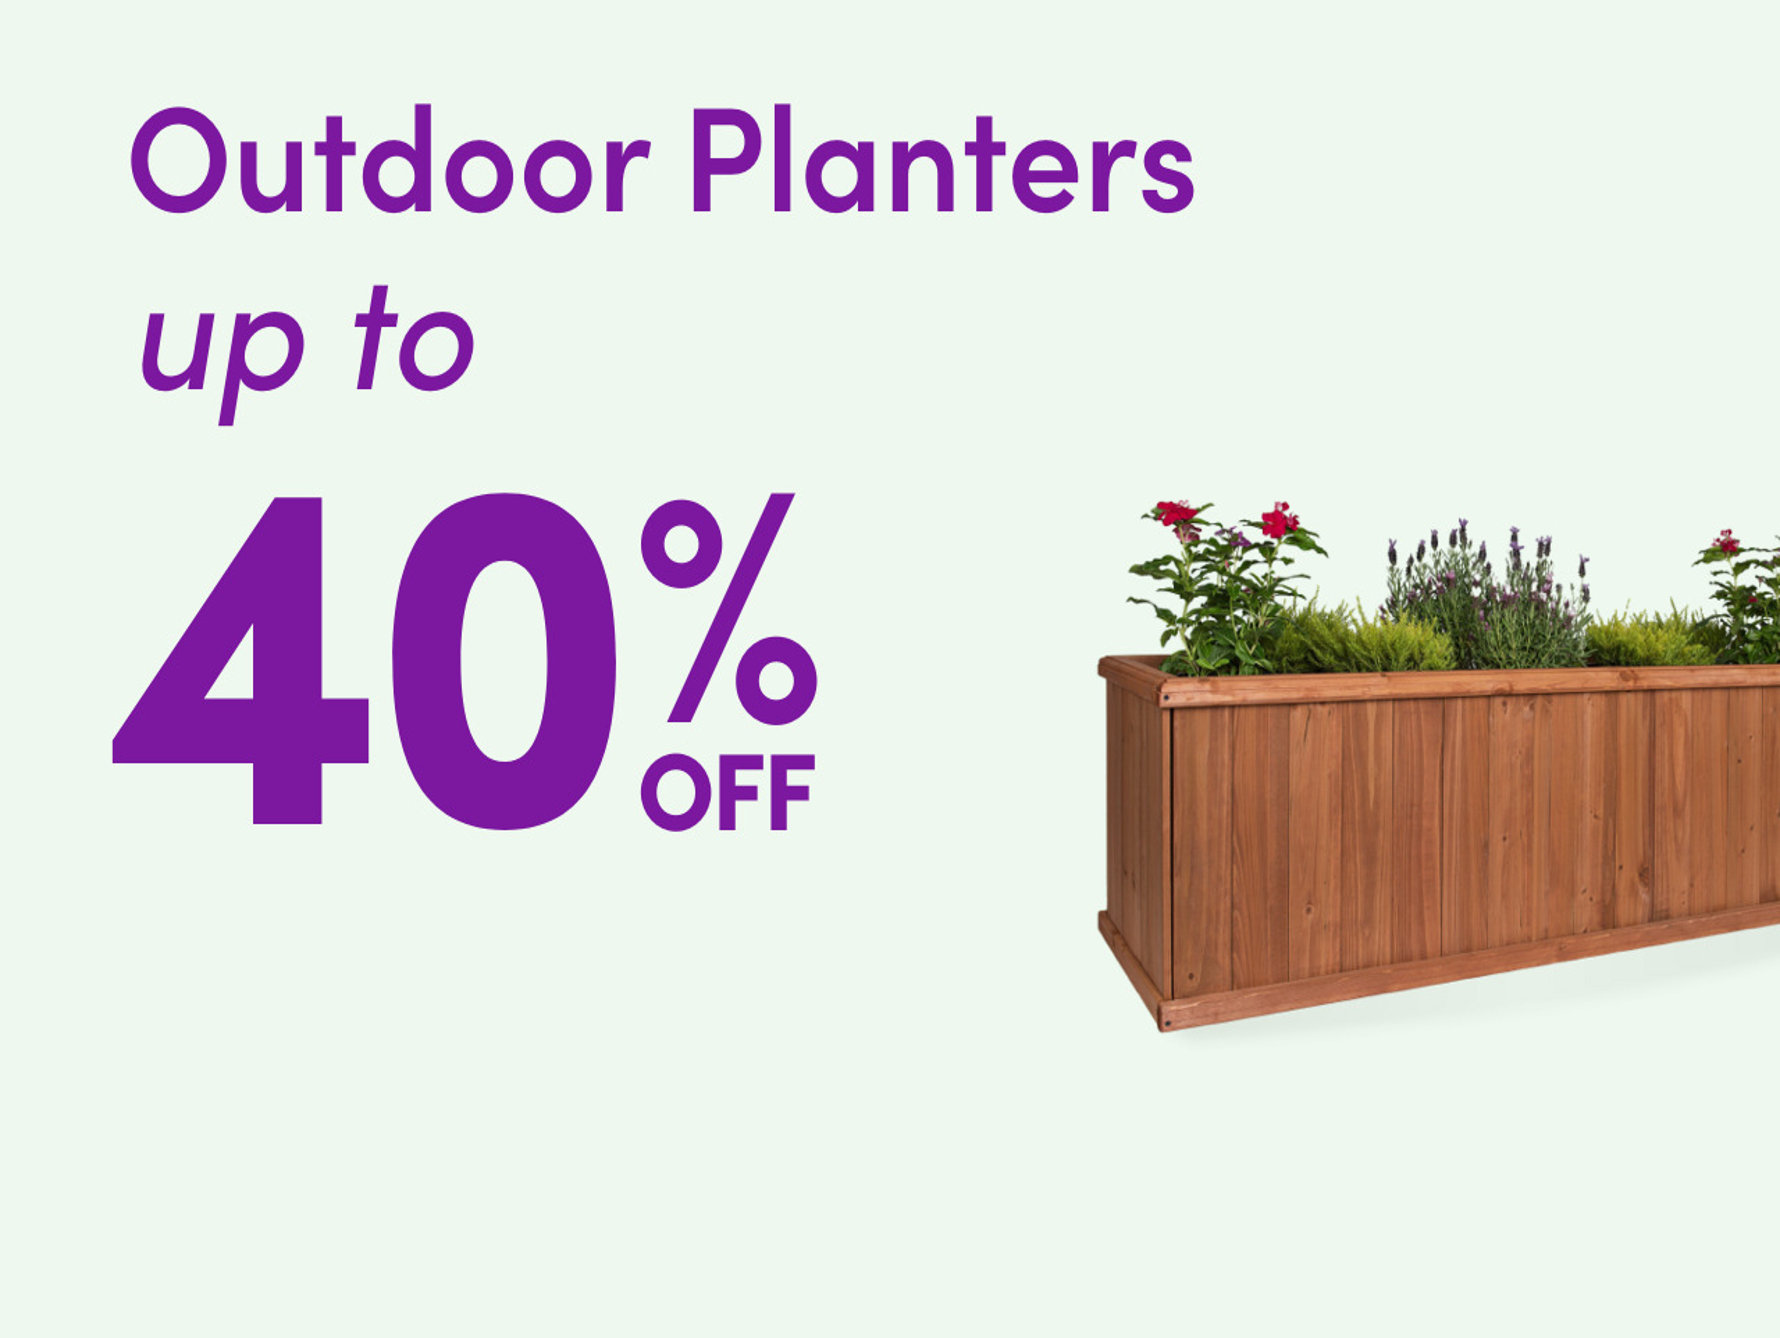 Outdoor Planters up to 40% off